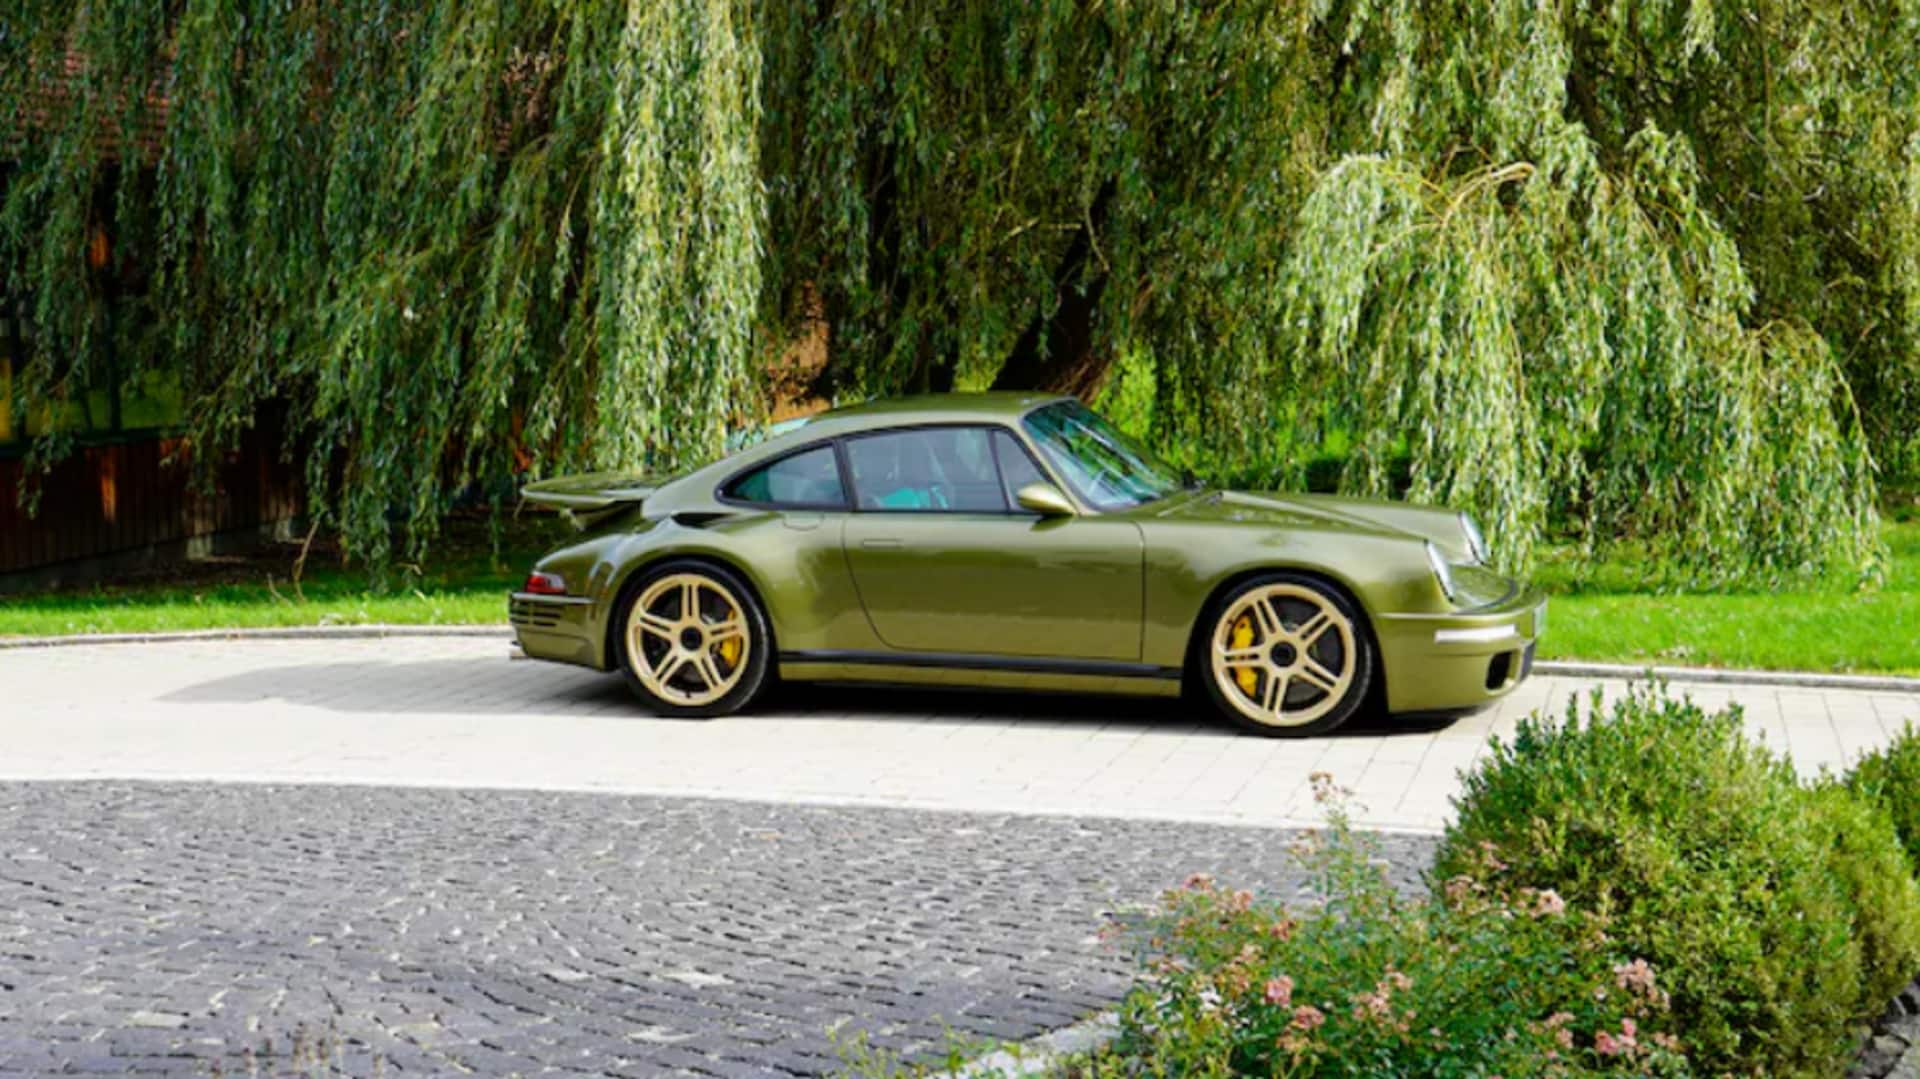 RUF pays homage to Porsche 911 with one-off Tribute model